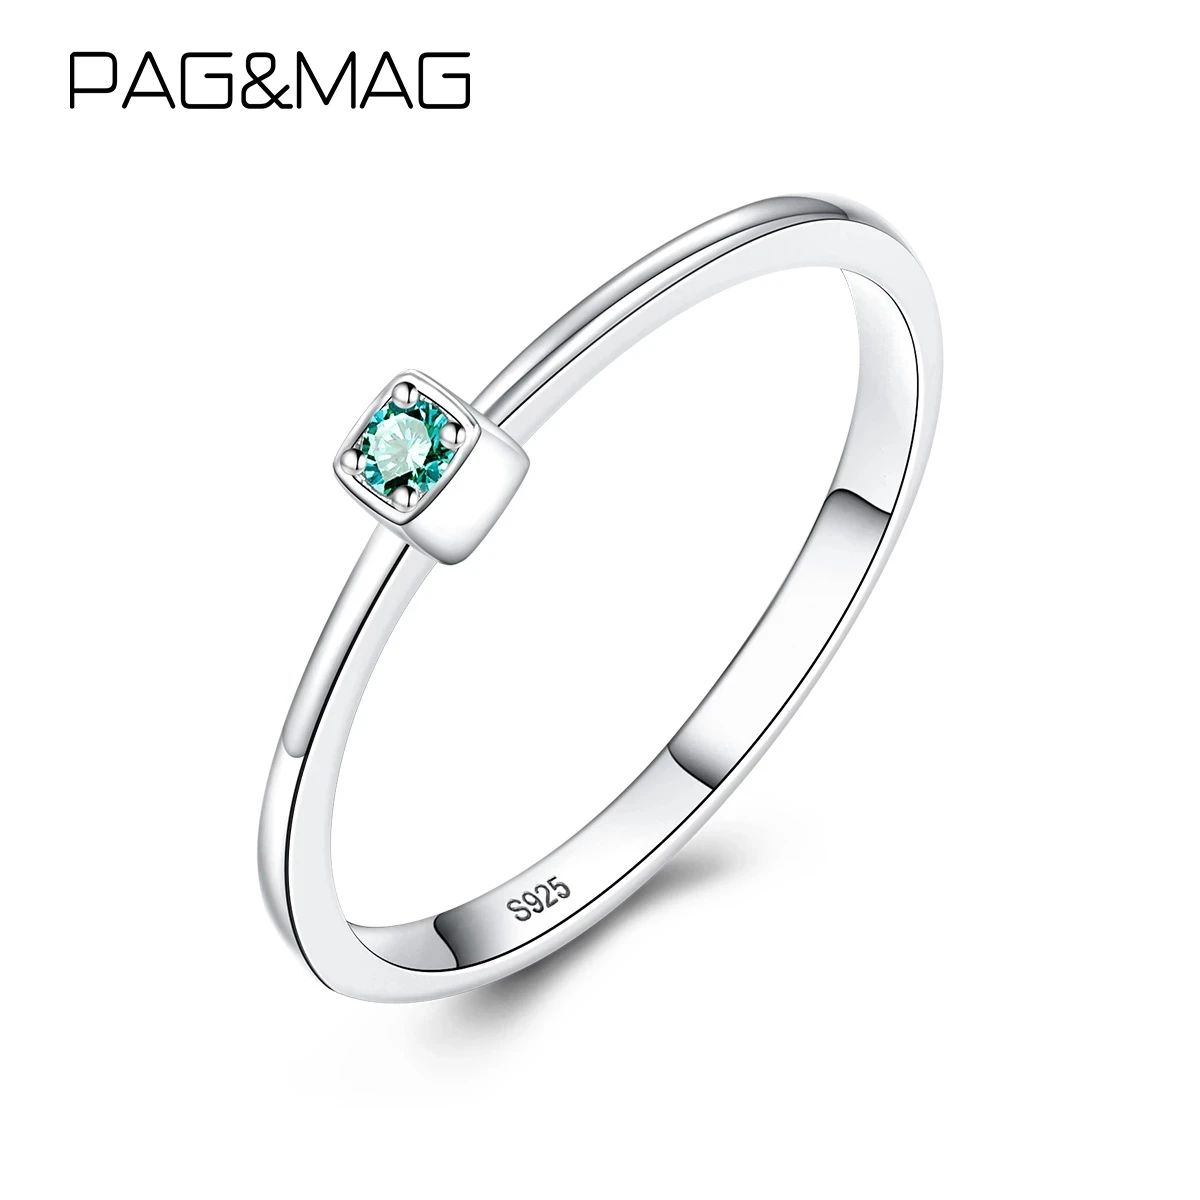 PAG&MAG Created Emerald VVS Bague Rings 925 Sterling Silver Stackable Ring For Women Green Gemstone joyas de plata 925 mujer